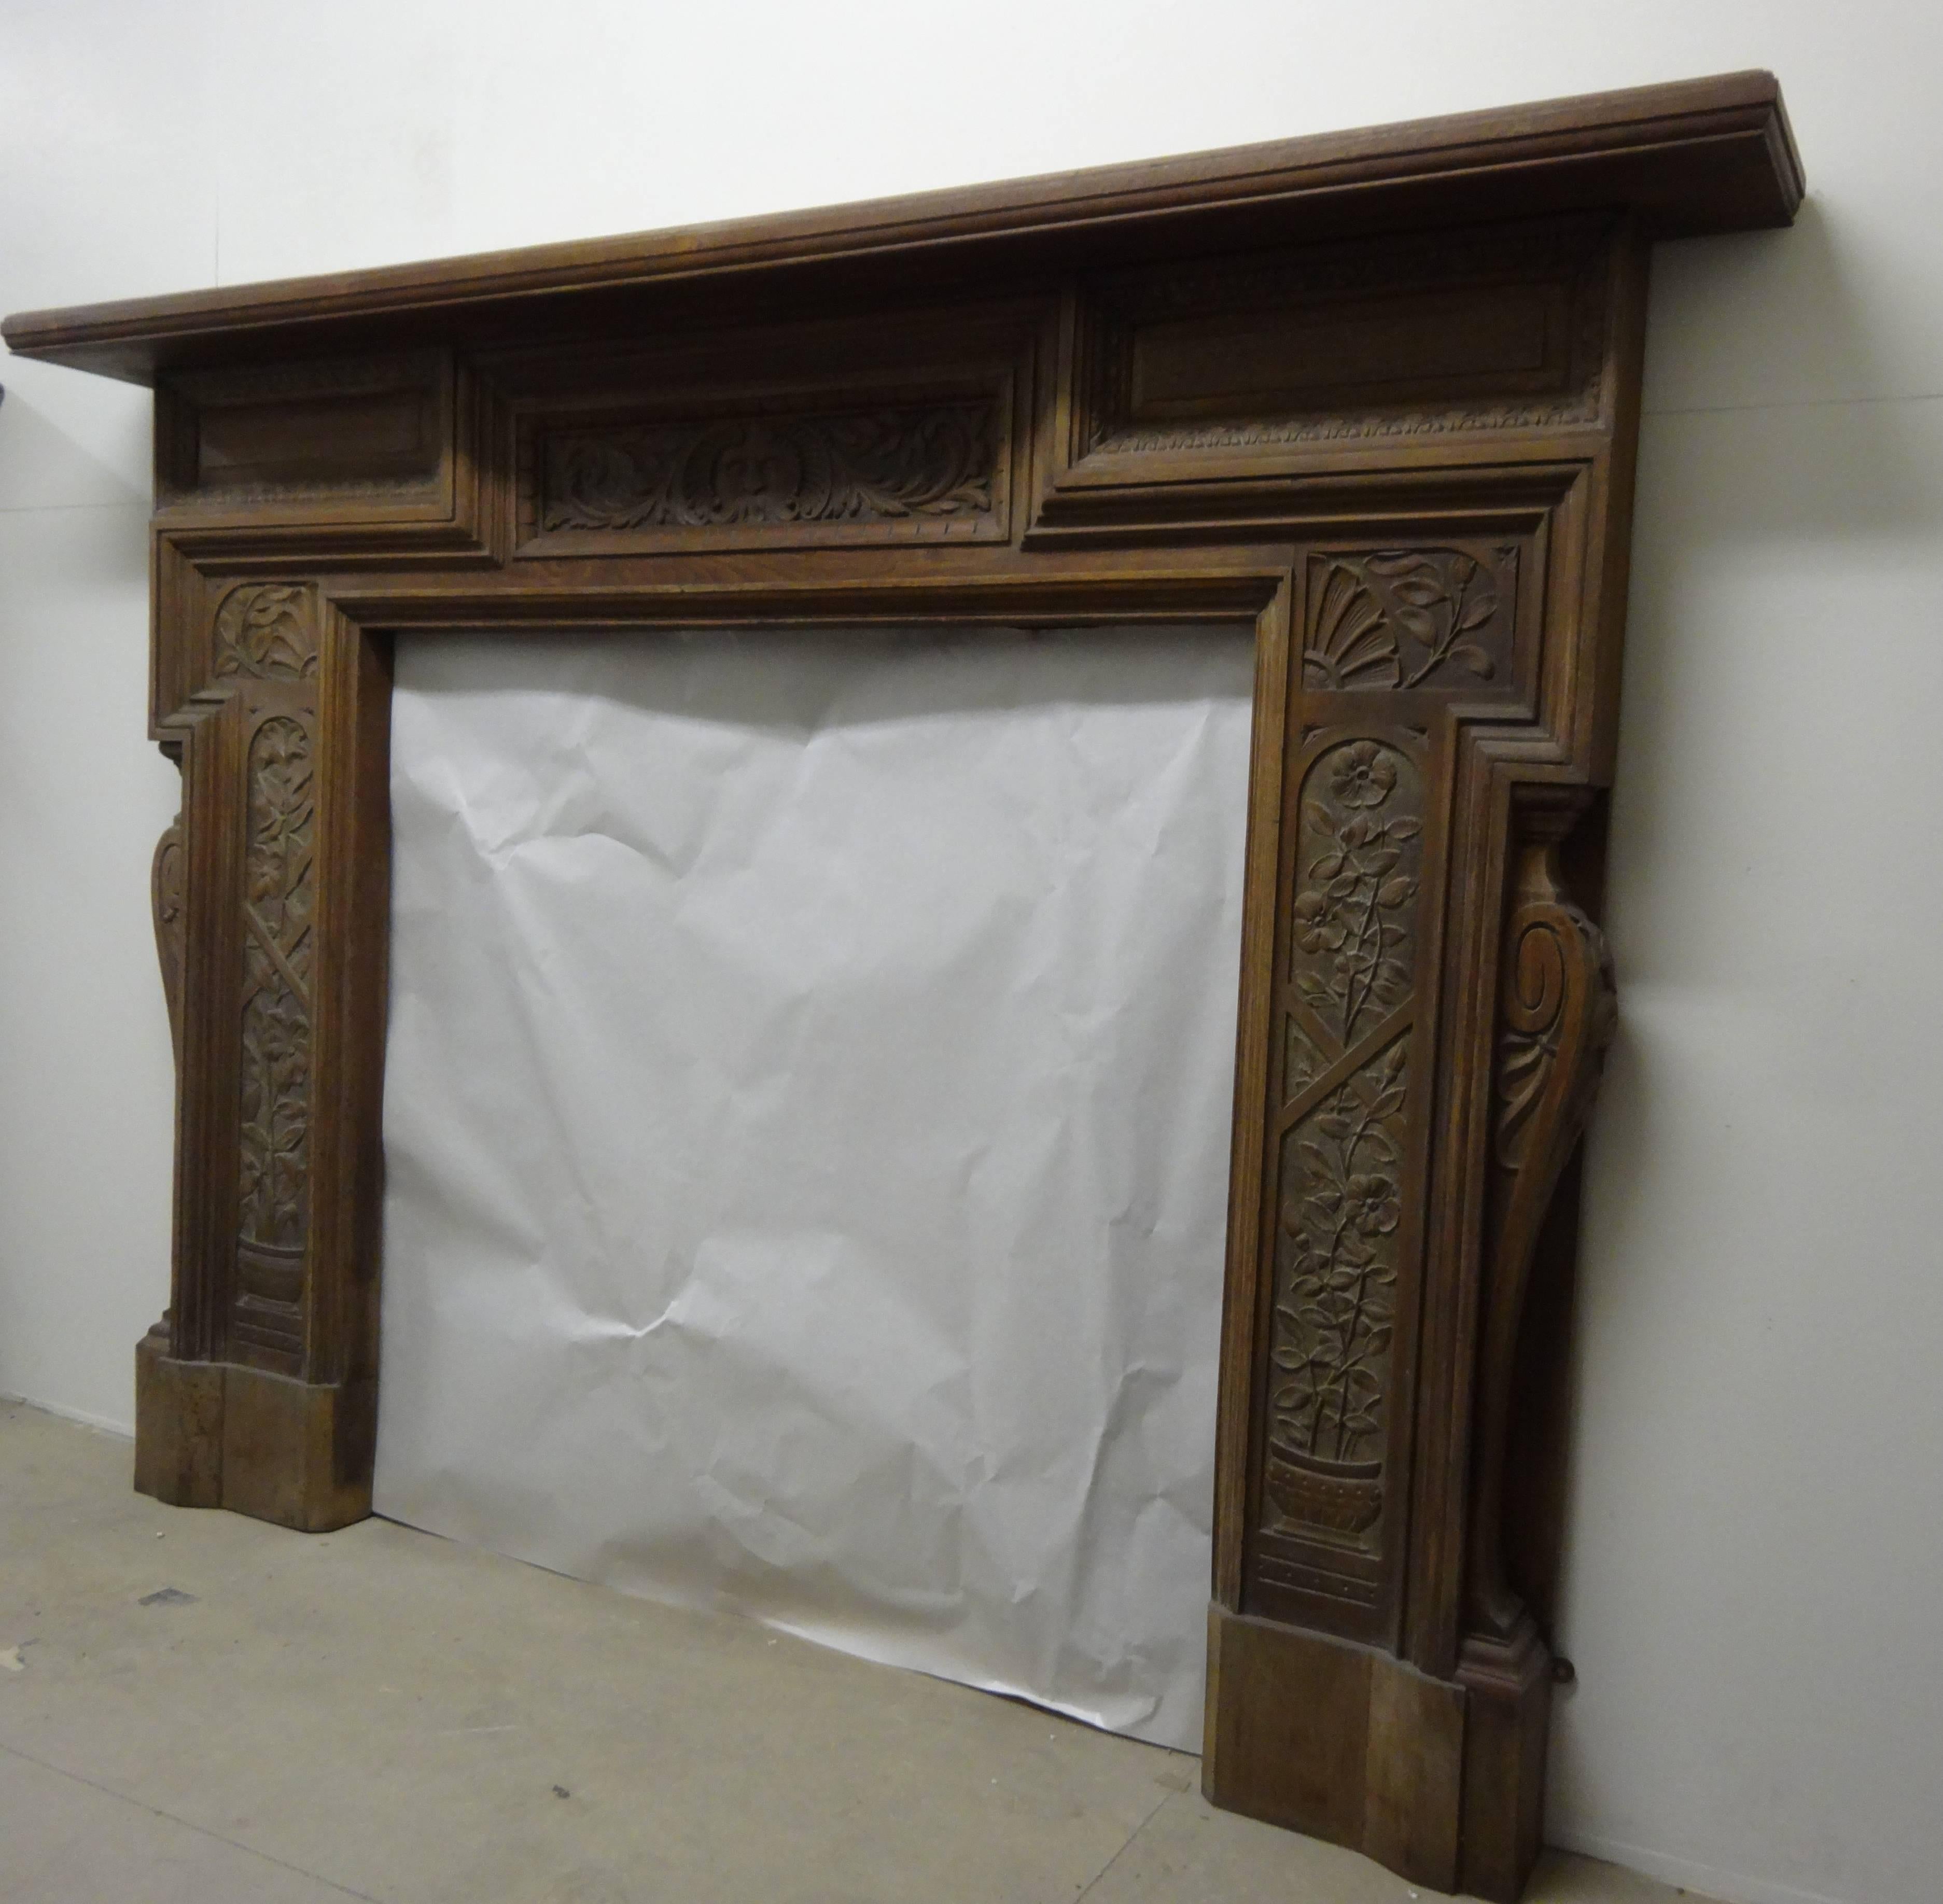 Rare antique 19th century Victorian stripped walnut fire surround. Ornately carved fire surround features Sun God to the frieze centre panel, sunflowers to the jambs.

Internal aperture measurements:
Width 43.25 inches
Height 42.13 inches.